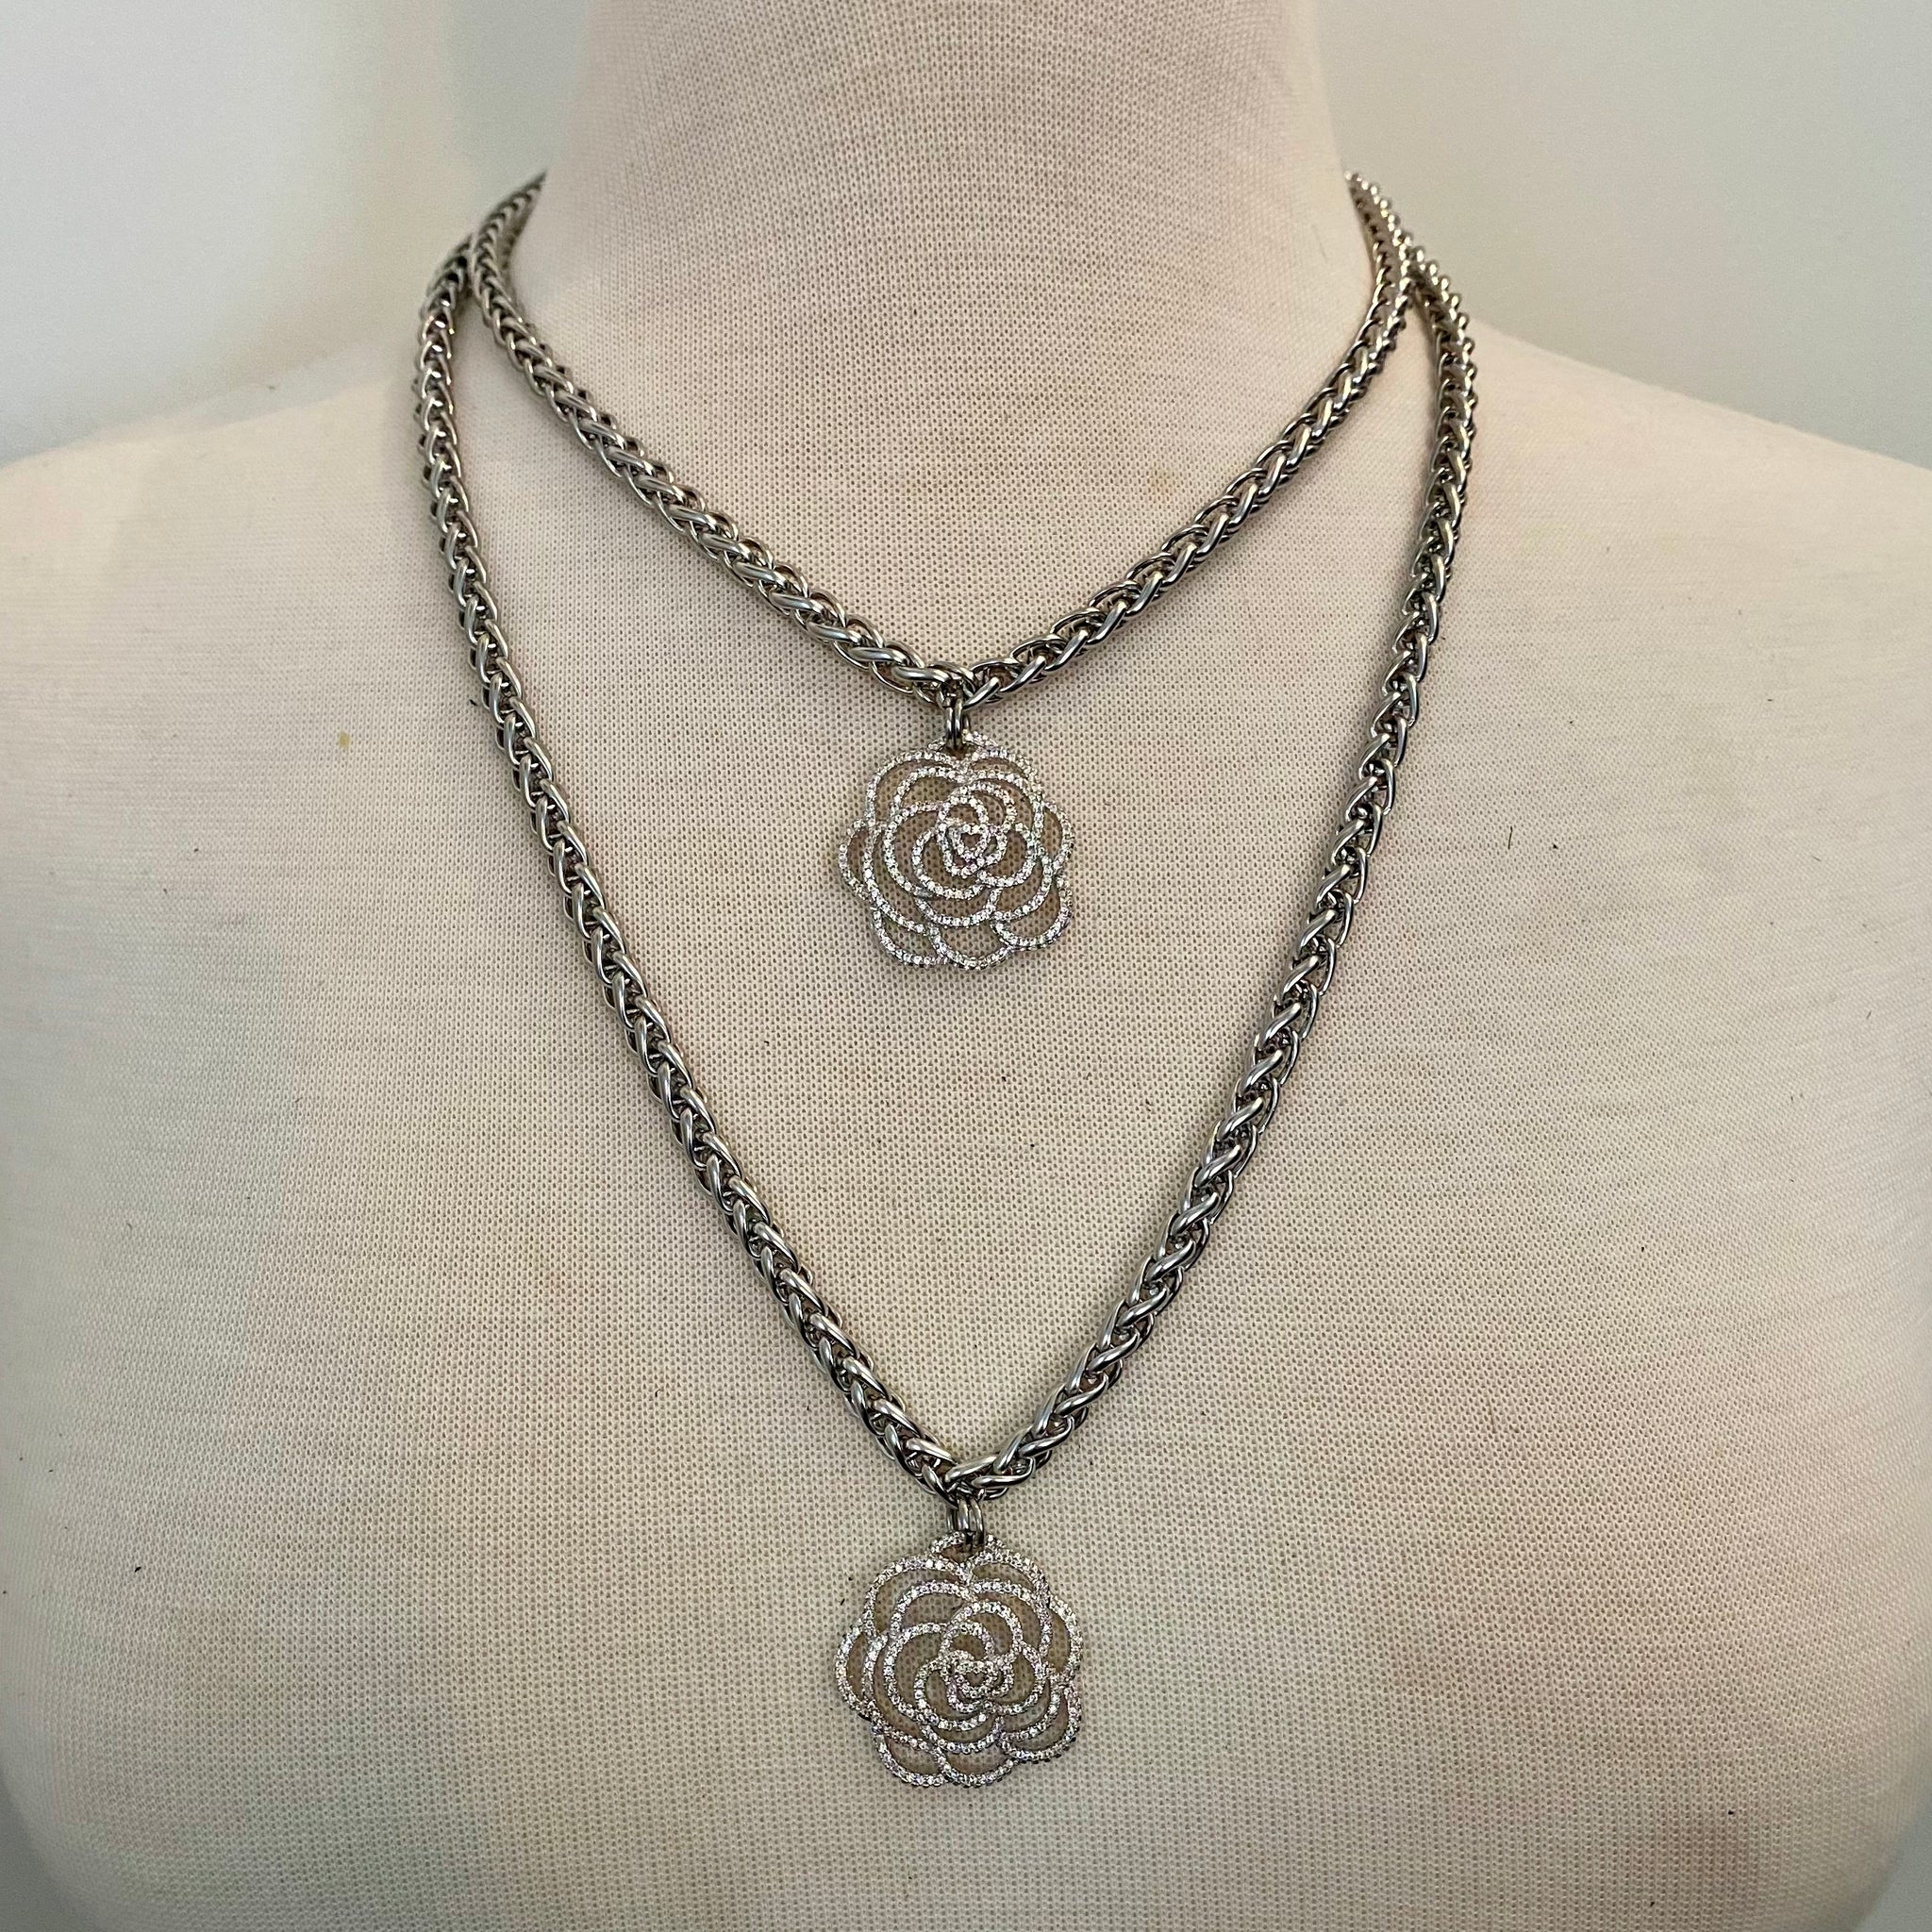 Camellia necklace by Nyet Jewelry  Edit alt text